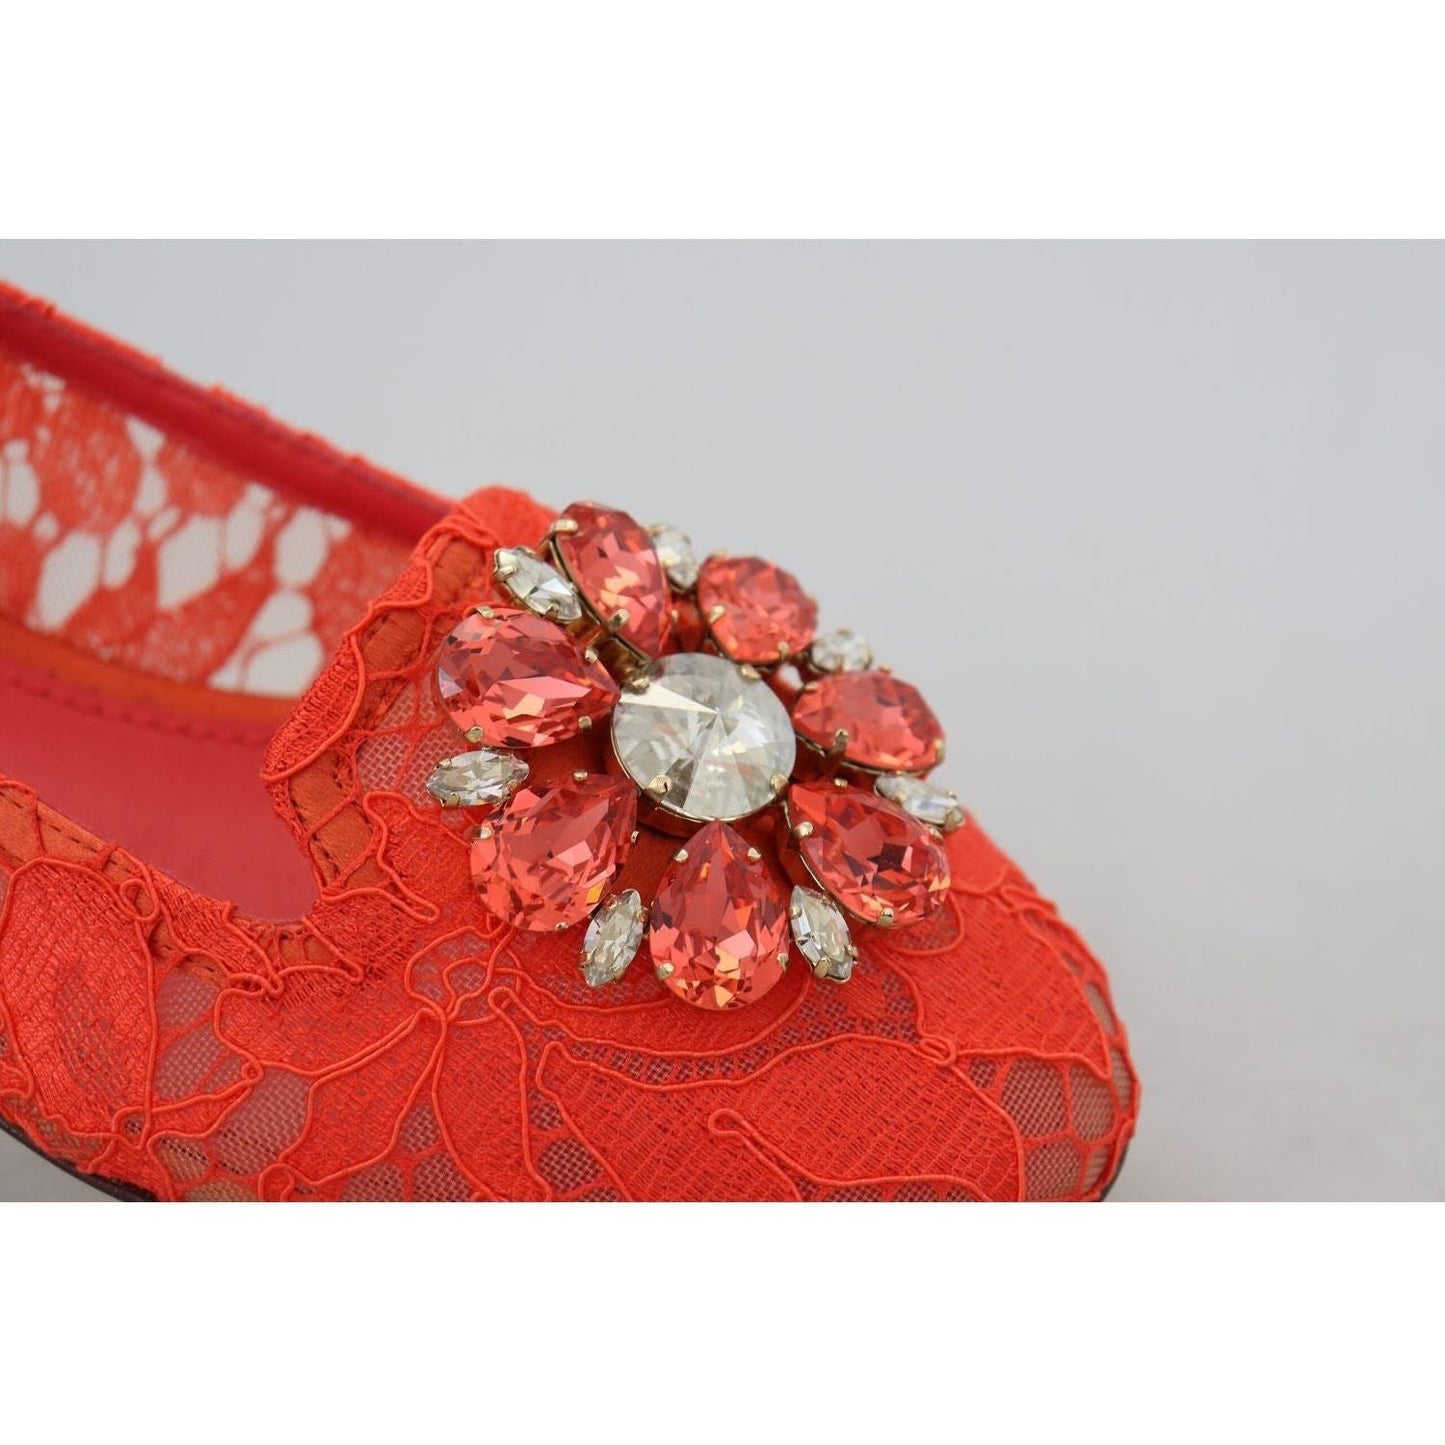 Dolce & Gabbana Elegant Lace Vally Flats in Coral Red red-taormina-lace-crystals-ballet-flats-shoes IMG_4971-scaled-5408fd2e-92e.jpg